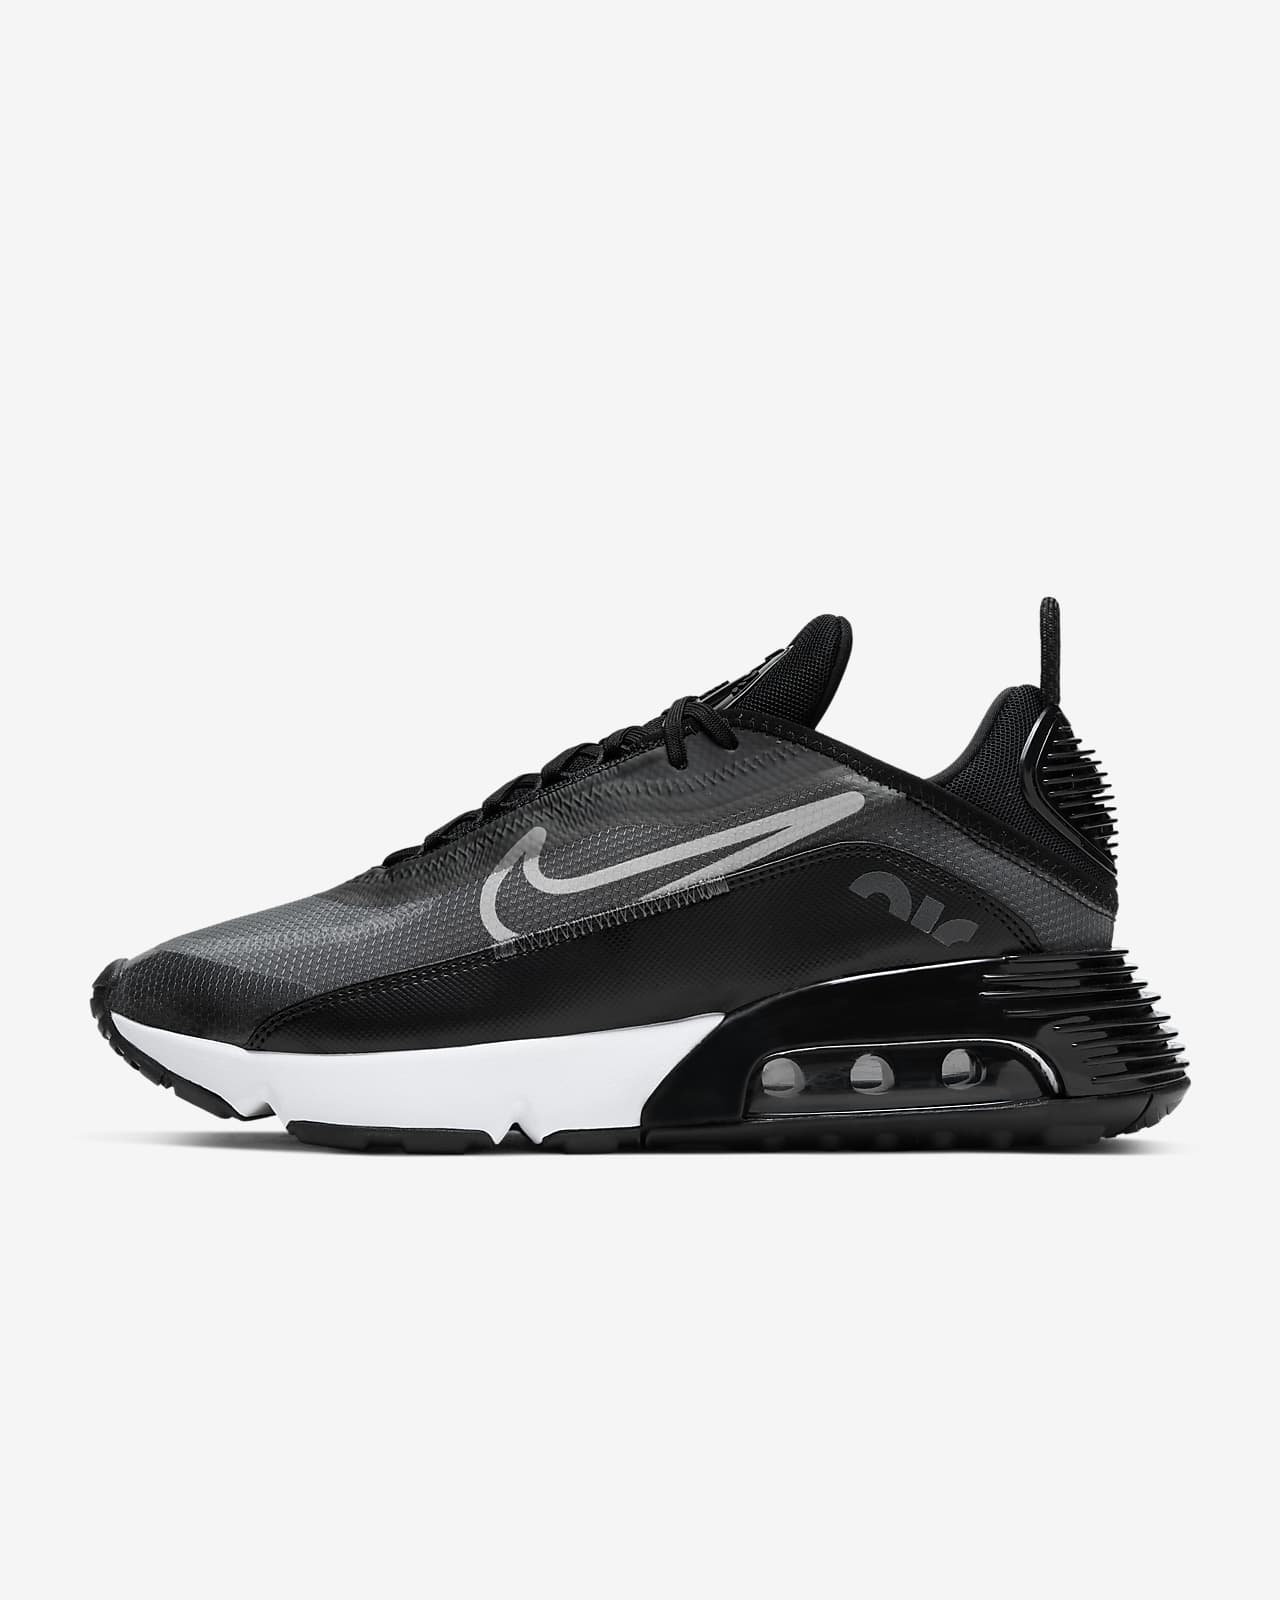 black gray and white air max